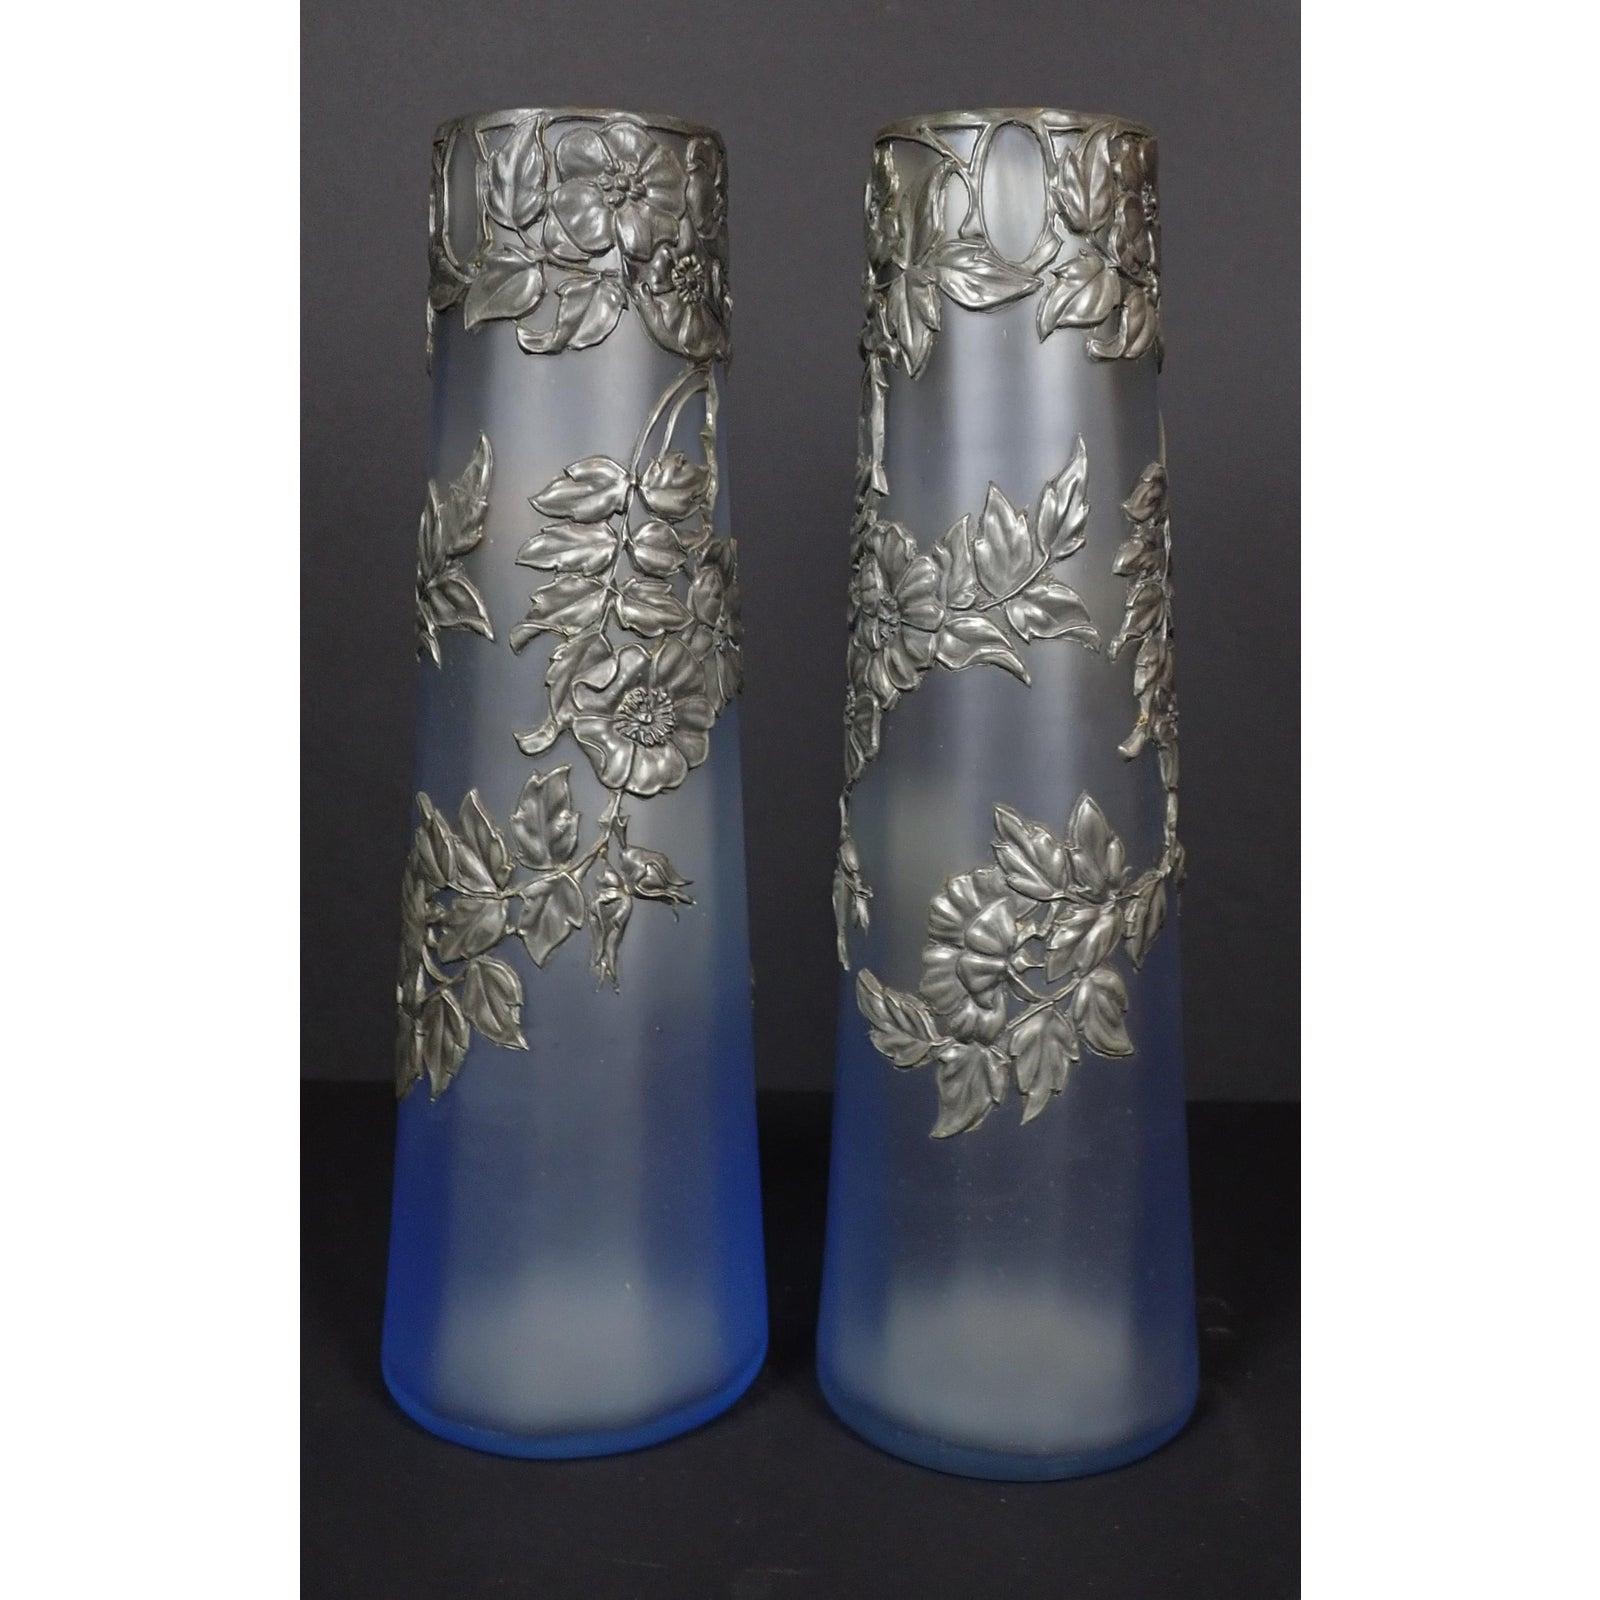 A pair of Pewter mounted opalescent glass vases. Pair of Art Nouveau style frosted pale blue opalescent art glass set with floral metal overlay.